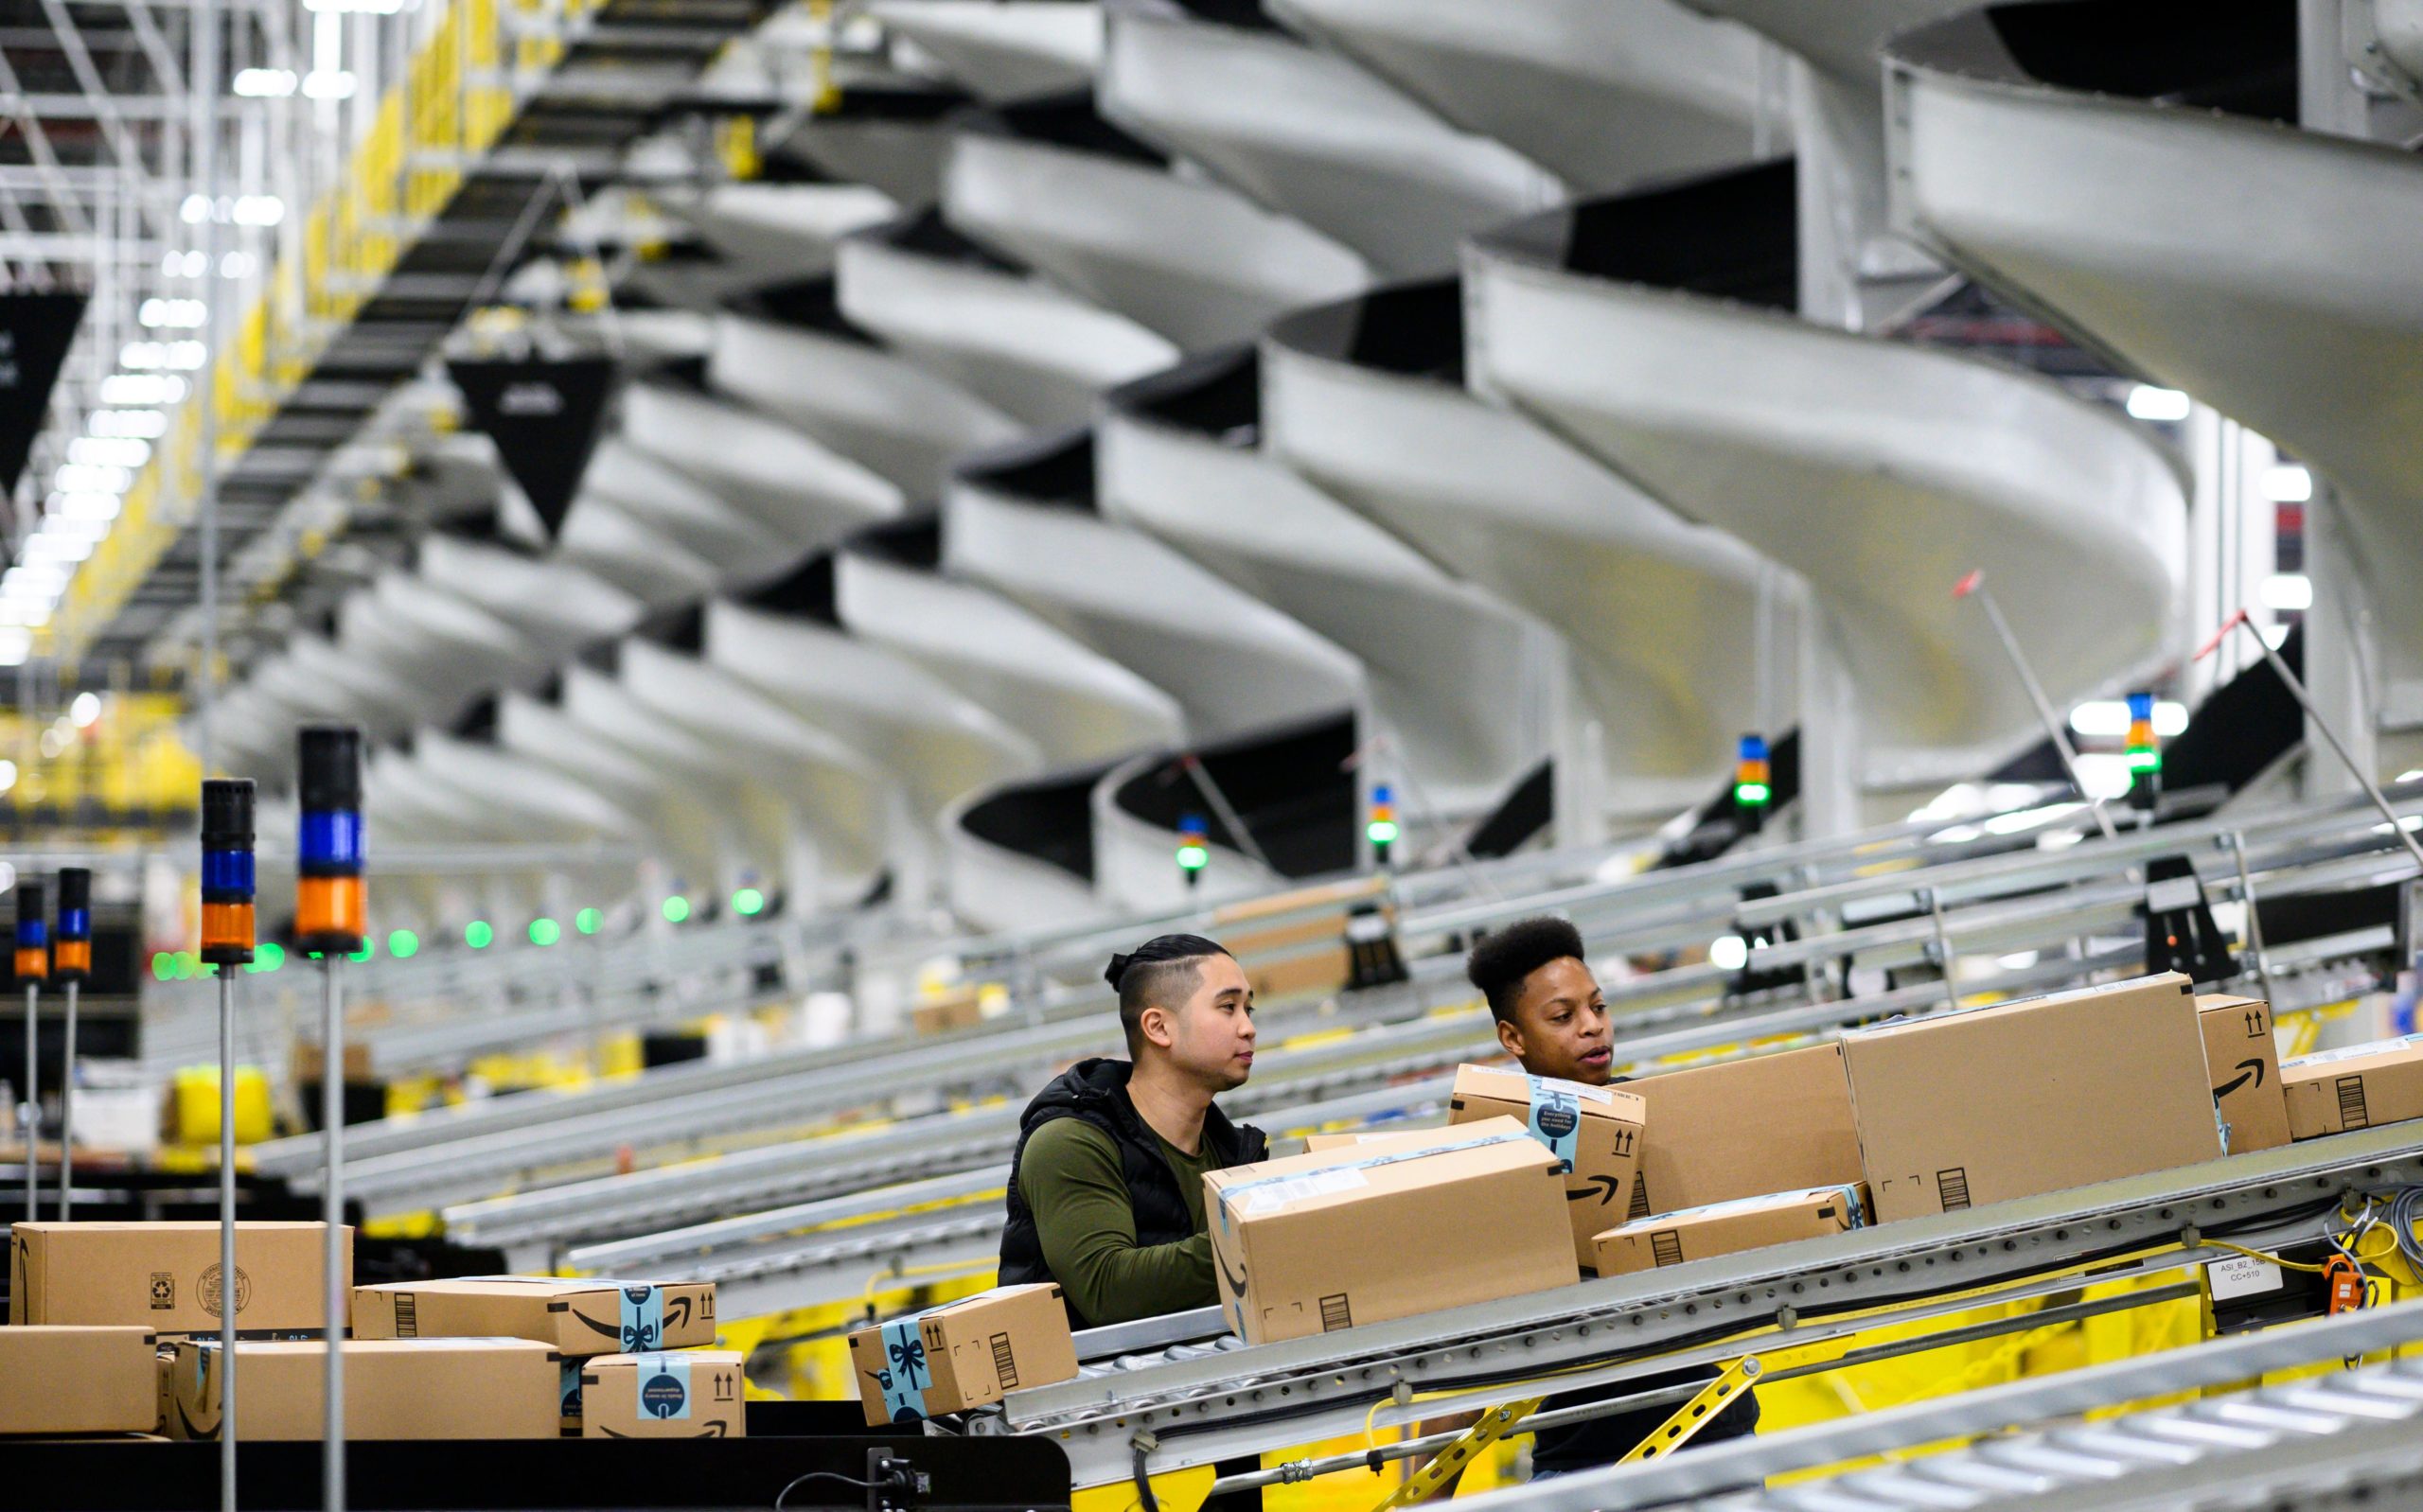 Men work at a distribution station in the 855,000-square-foot Amazon fulfillment center in Staten Island, one of the five boroughs of New York City, on February 5, 2019.(JOHANNES EISELE/AFP via Getty Images)